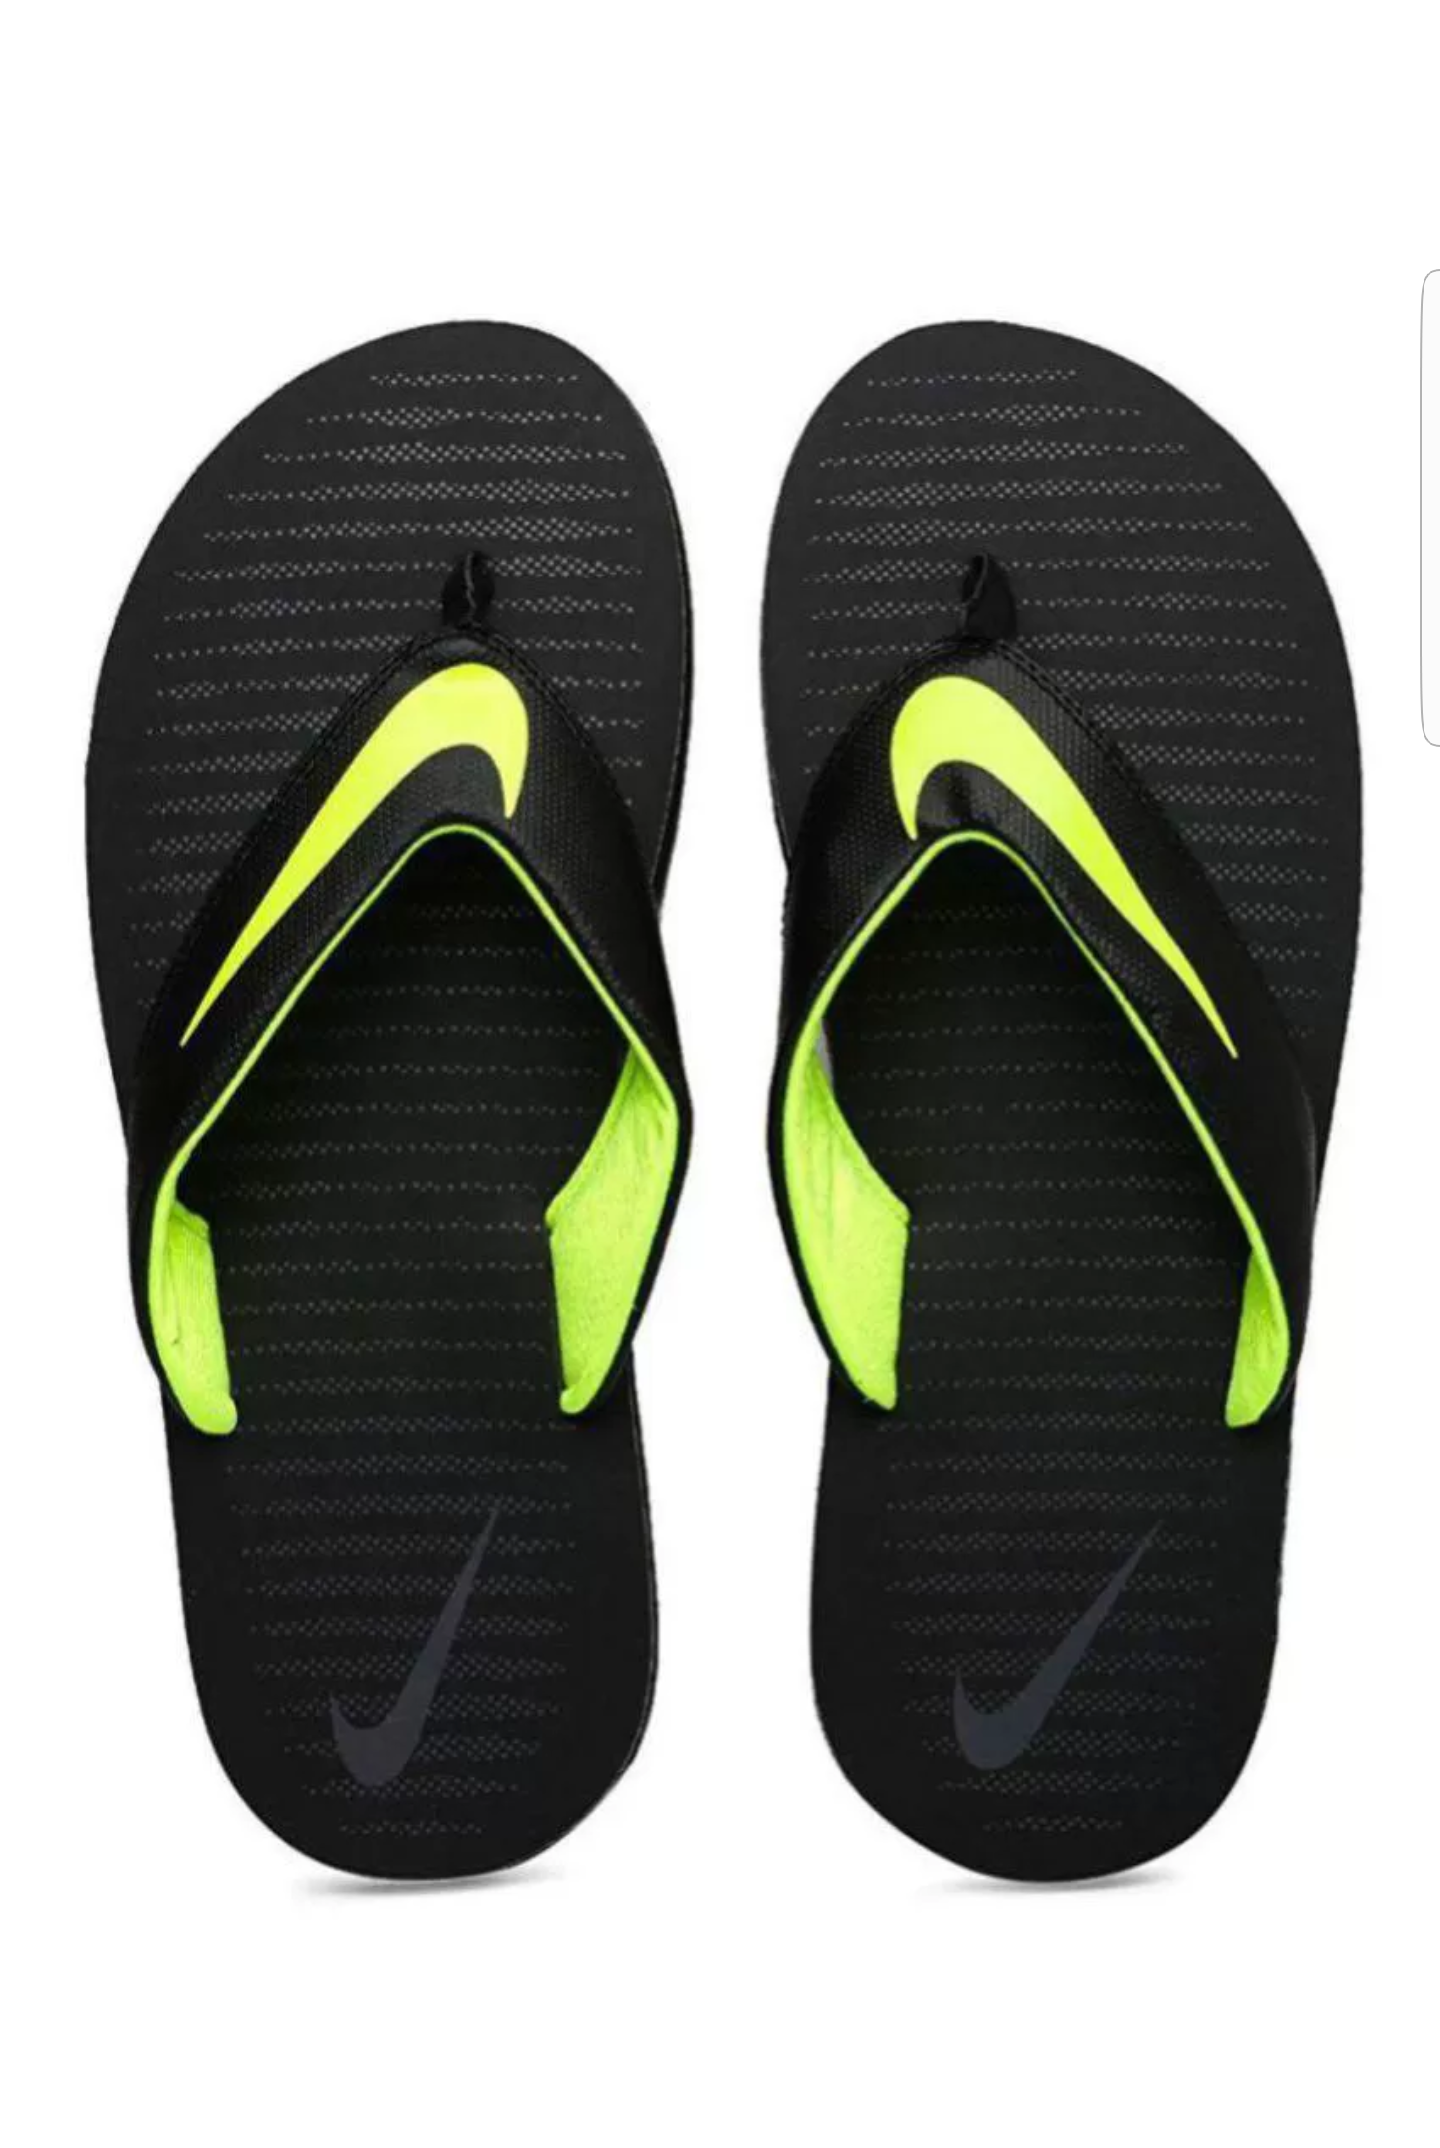 snapdeal nike slippers are original